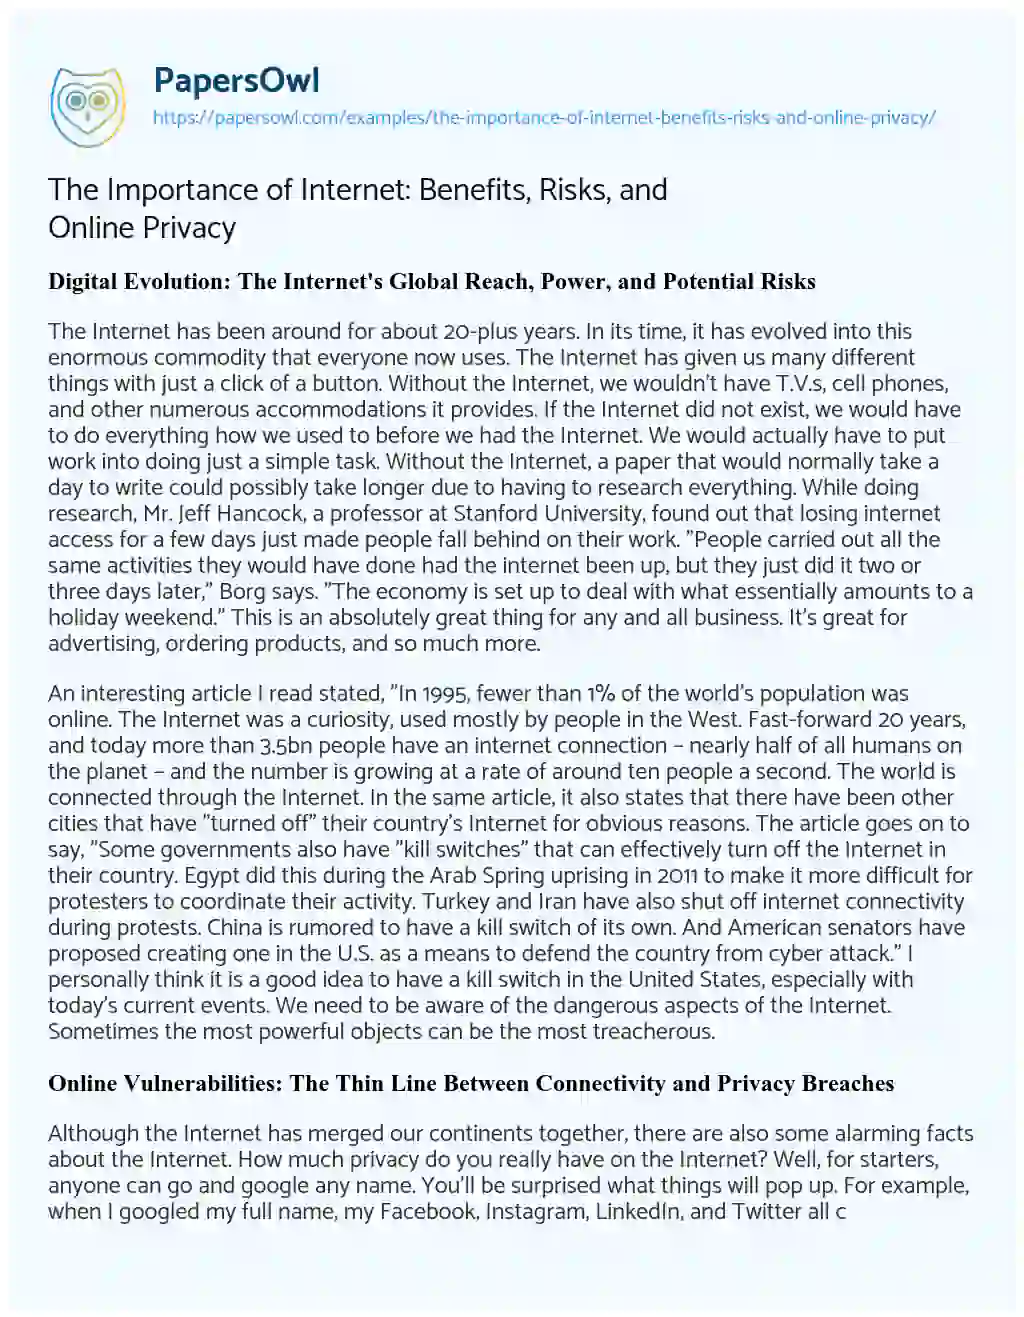 Essay on The Importance of Internet: Benefits, Risks, and Online Privacy